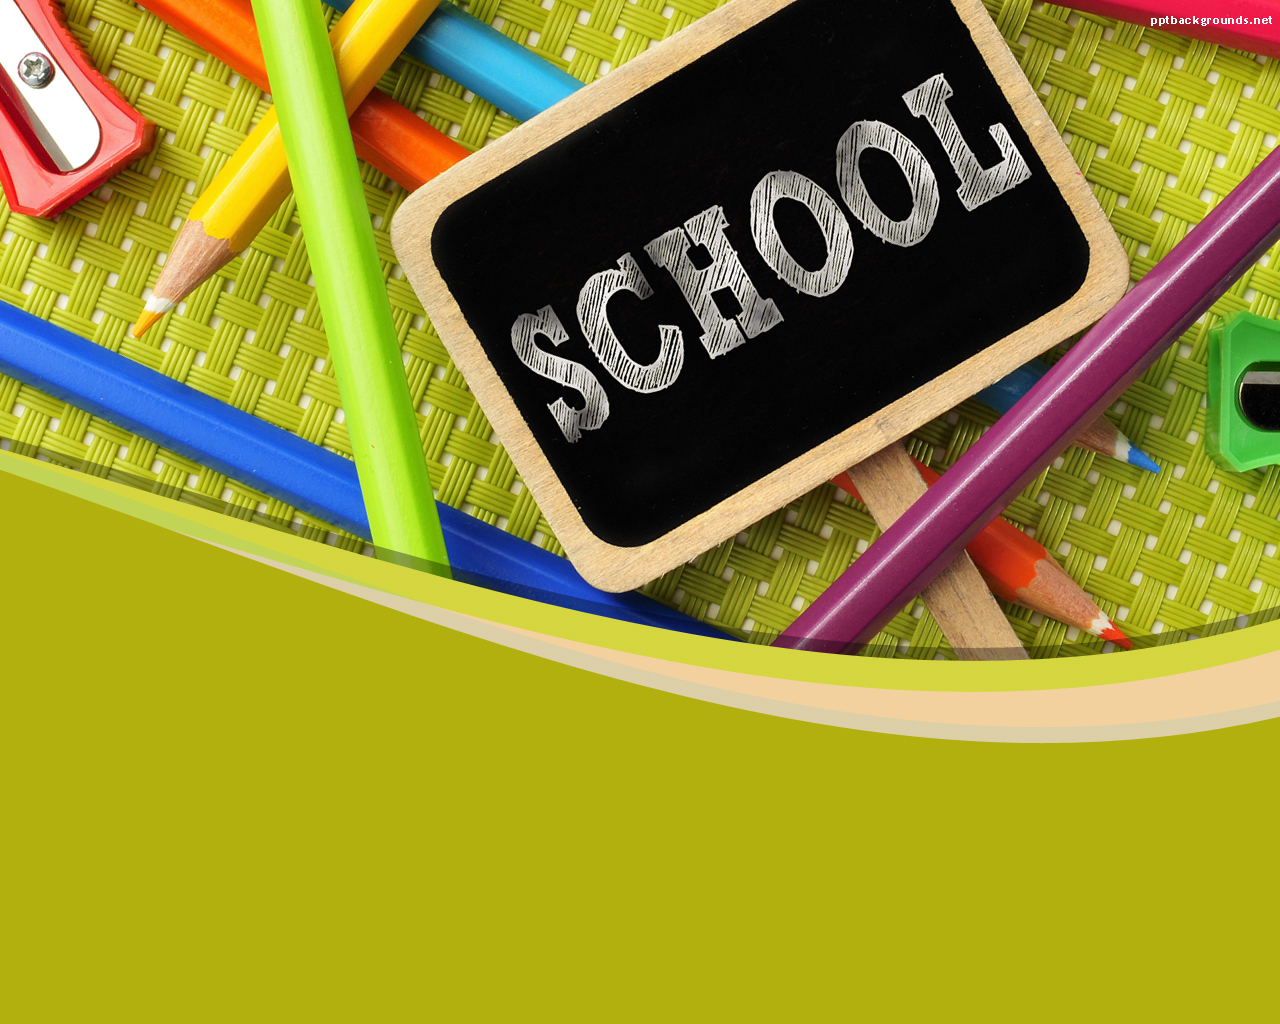 [48+] Free School Backgrounds and Wallpapers on WallpaperSafari